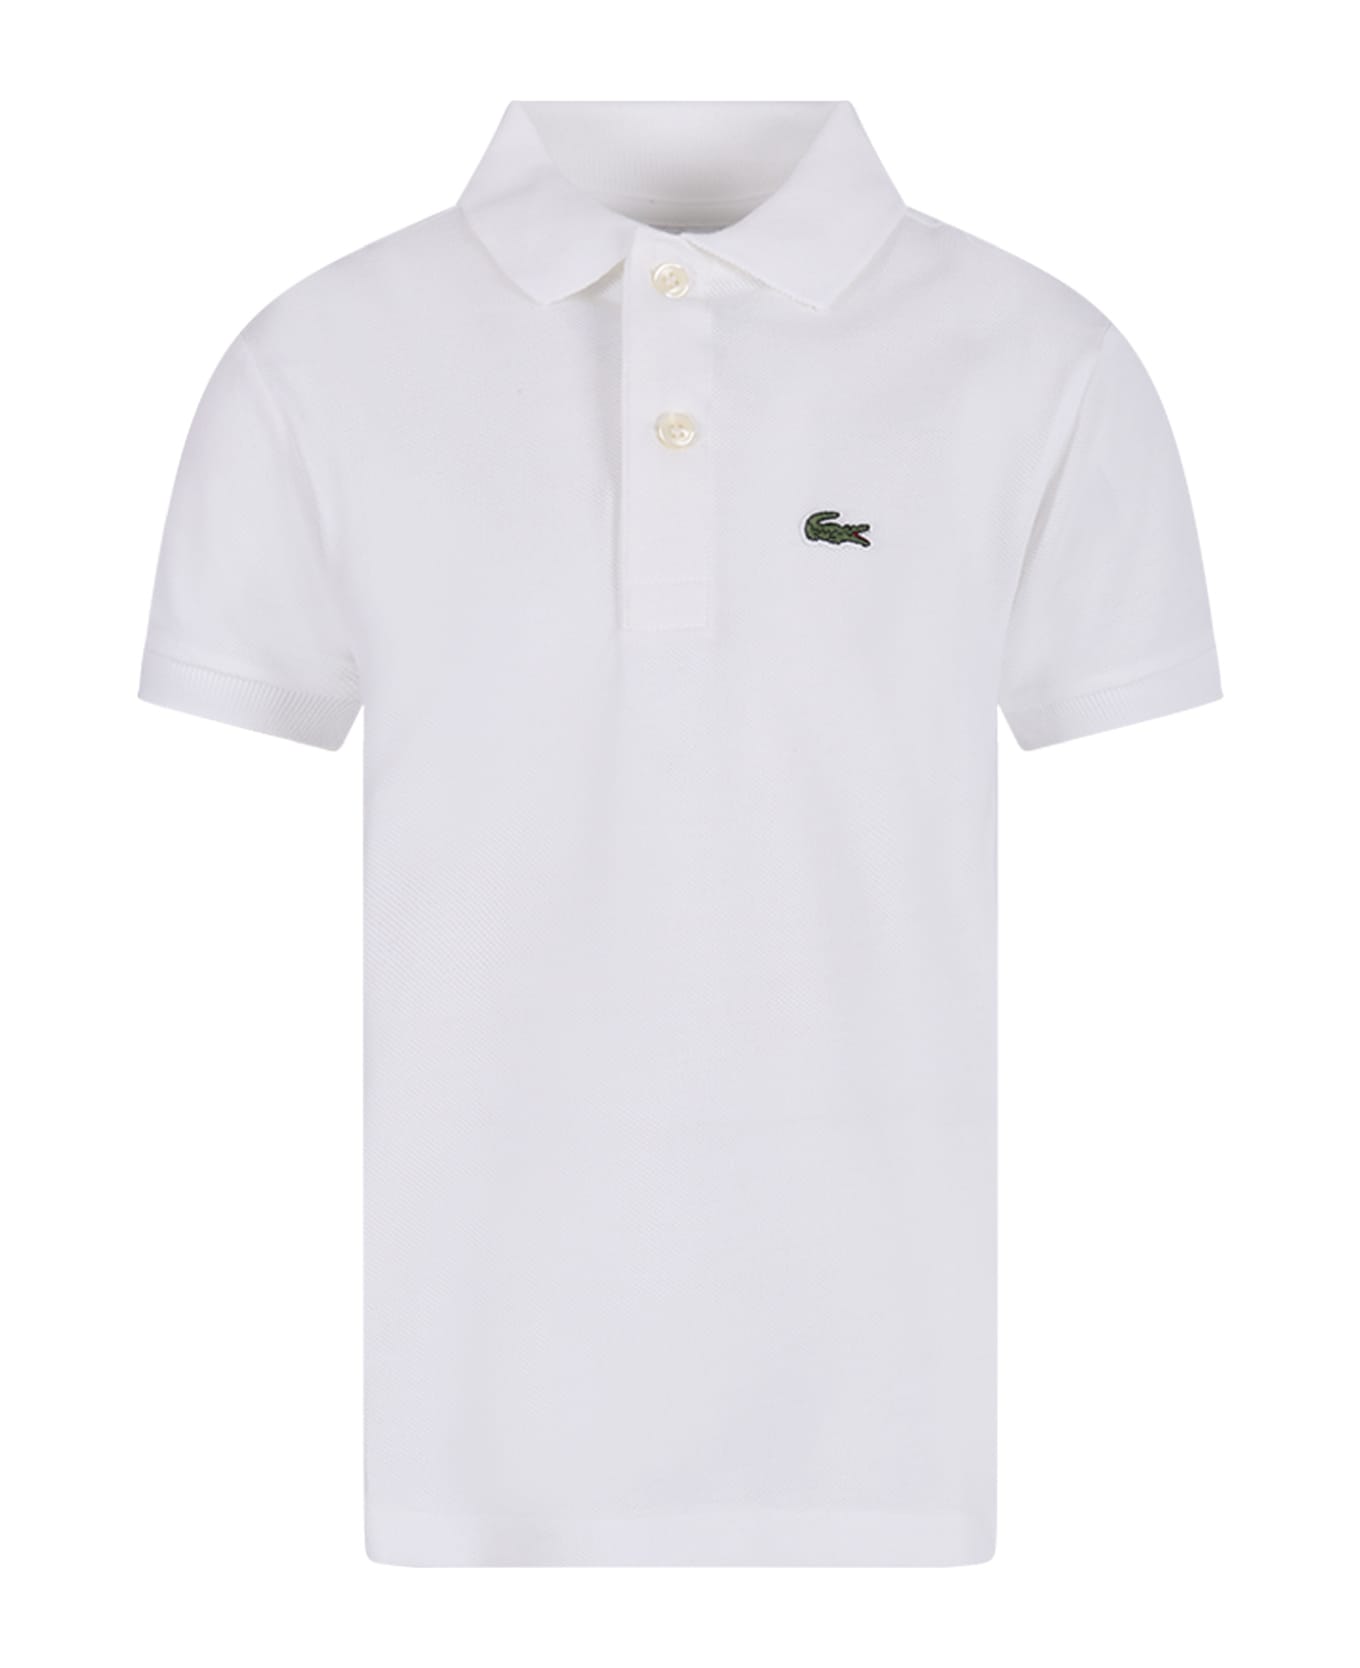 Lacoste White Polo Shirt For Boy With Green Crocodile - White